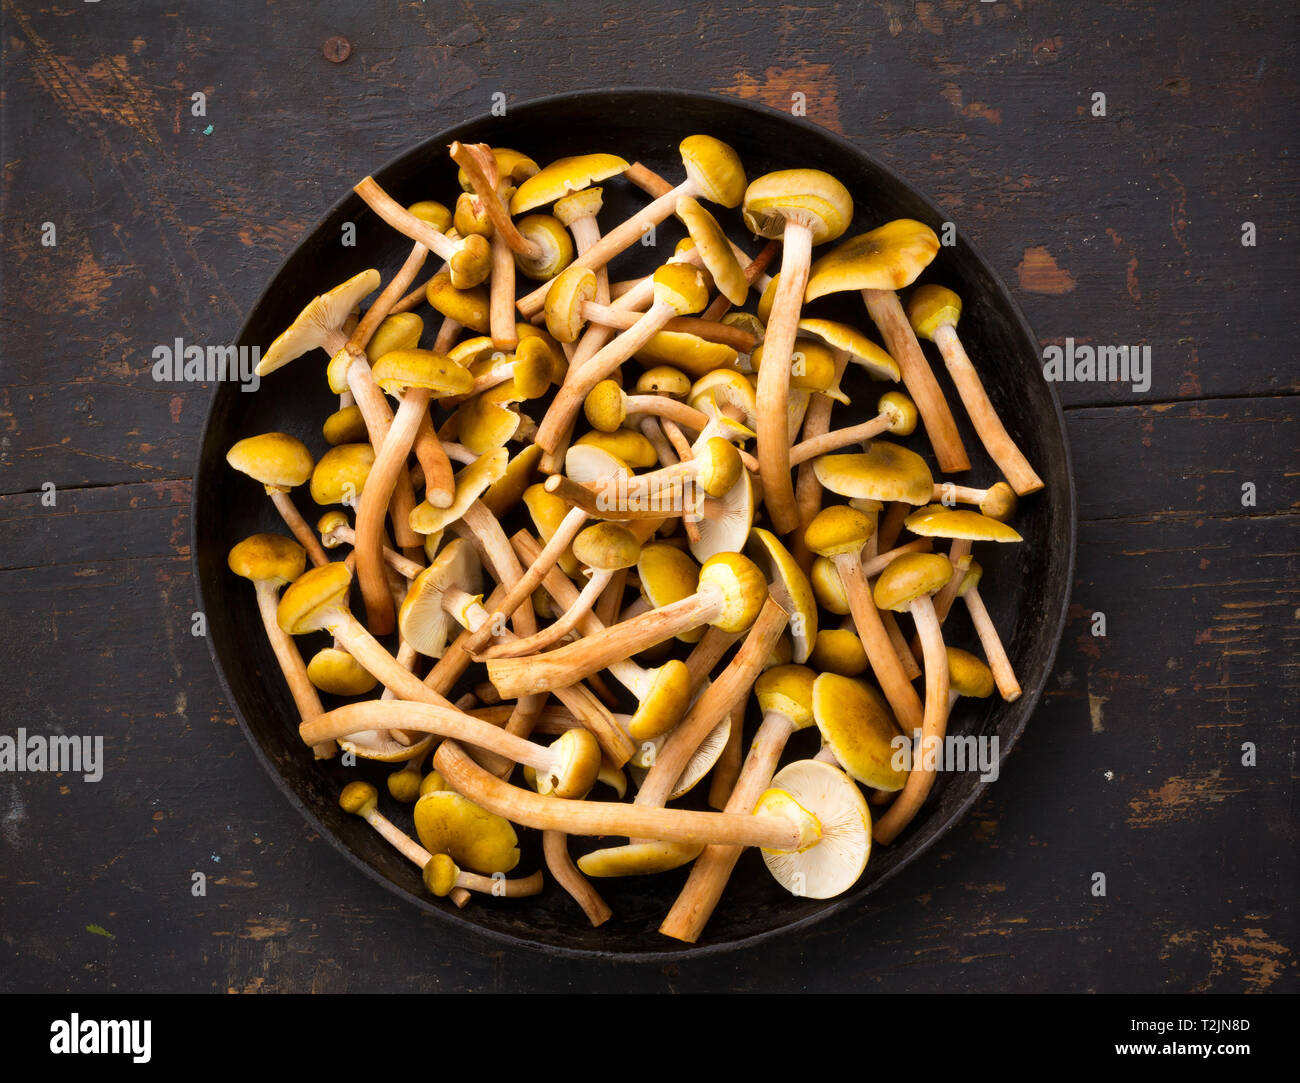 Raw Yellow Edible Wild Mushrooms Mushrooms In A Large Frying Pan On An Old Black Wooden Table Close-Up Top View Stock Photo